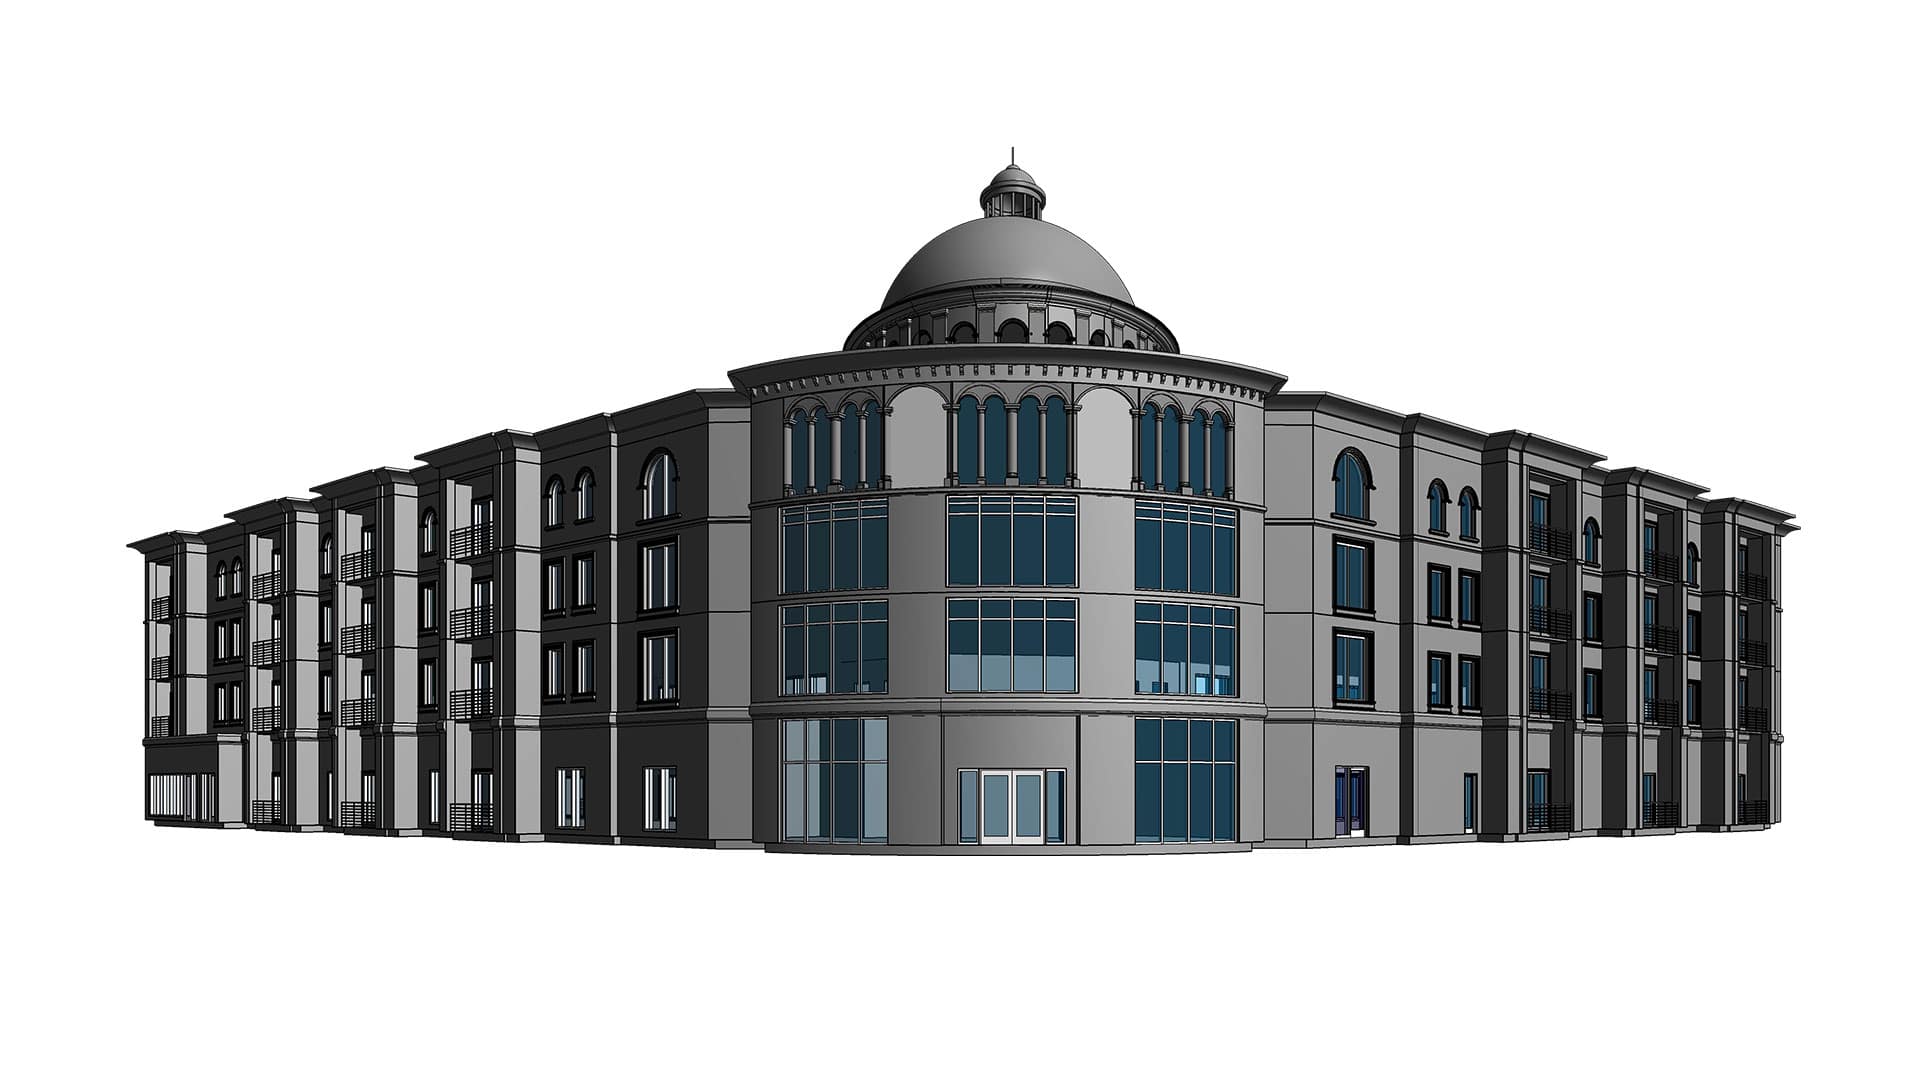 Remodeling project- Application of BIM